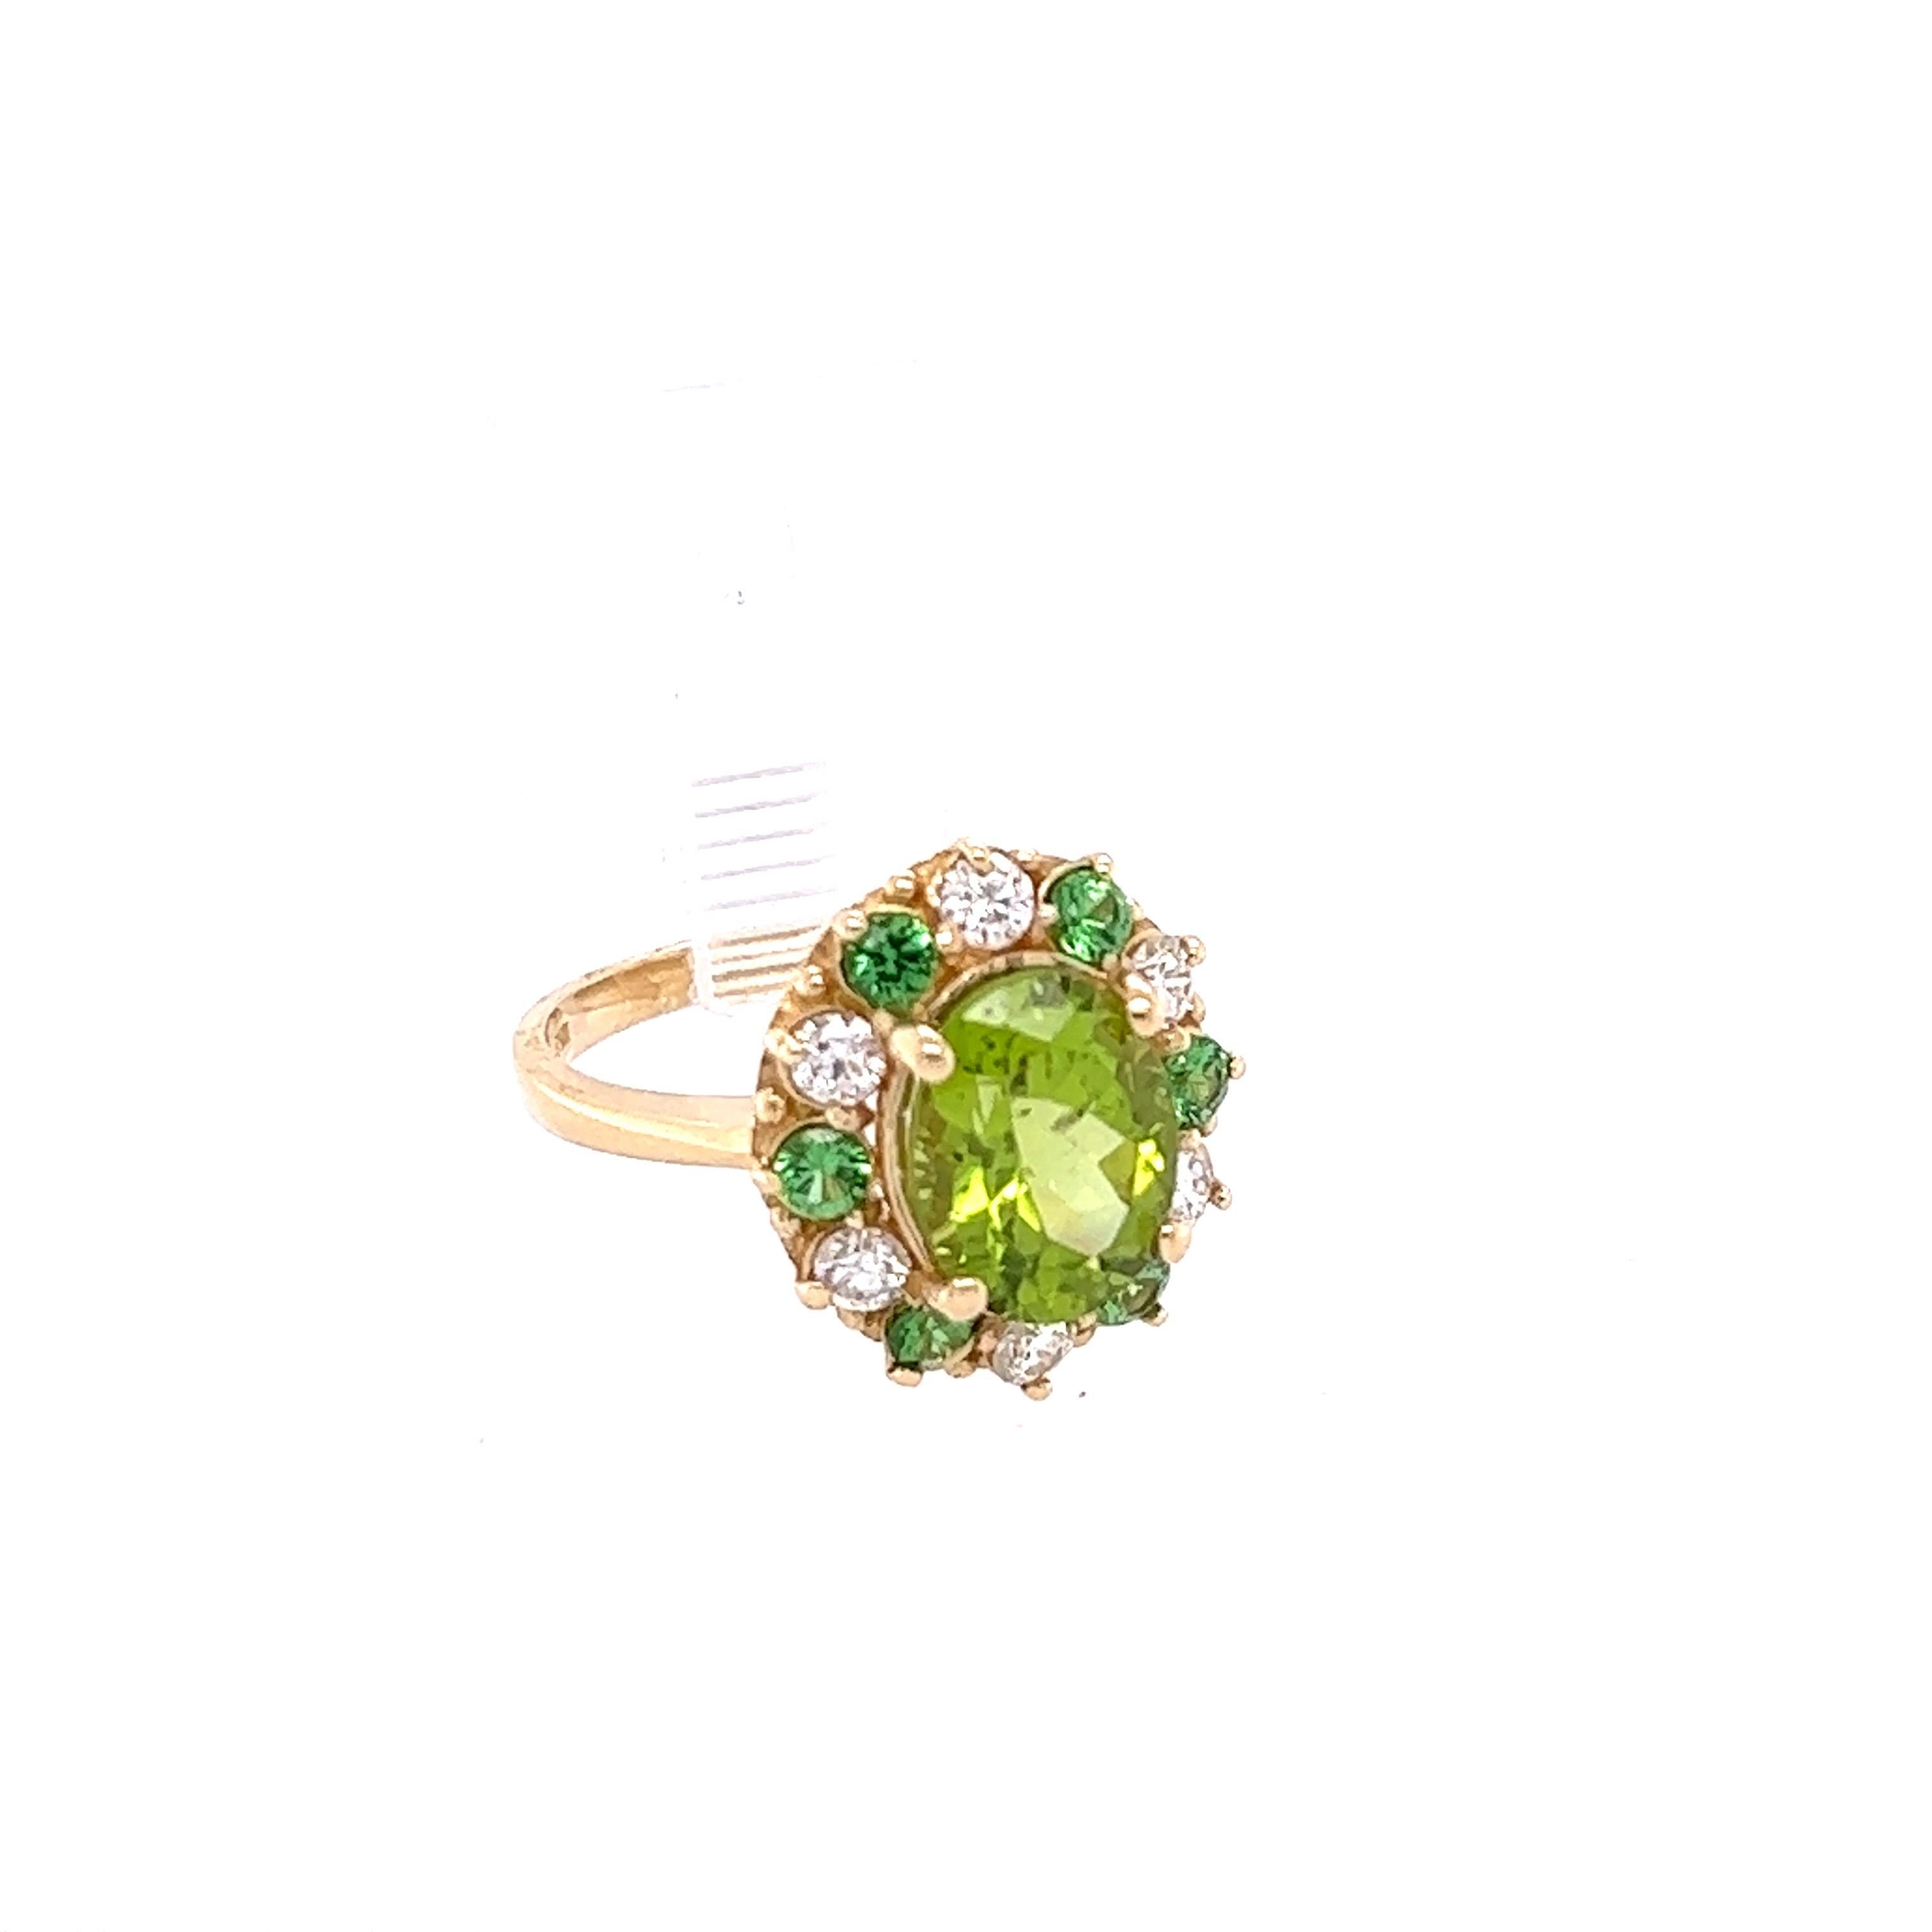 This ring has a Oval Cut Natural Peridot that weighs 3.14 carats. It is surrounded by 6 Round Cut Natural Diamonds that weigh 0.50 Carats, (Clarity: SI, Color: F) and 6 Round Cut Natural Tsavorites that weigh 0.49 carats. 
The total carat weight of